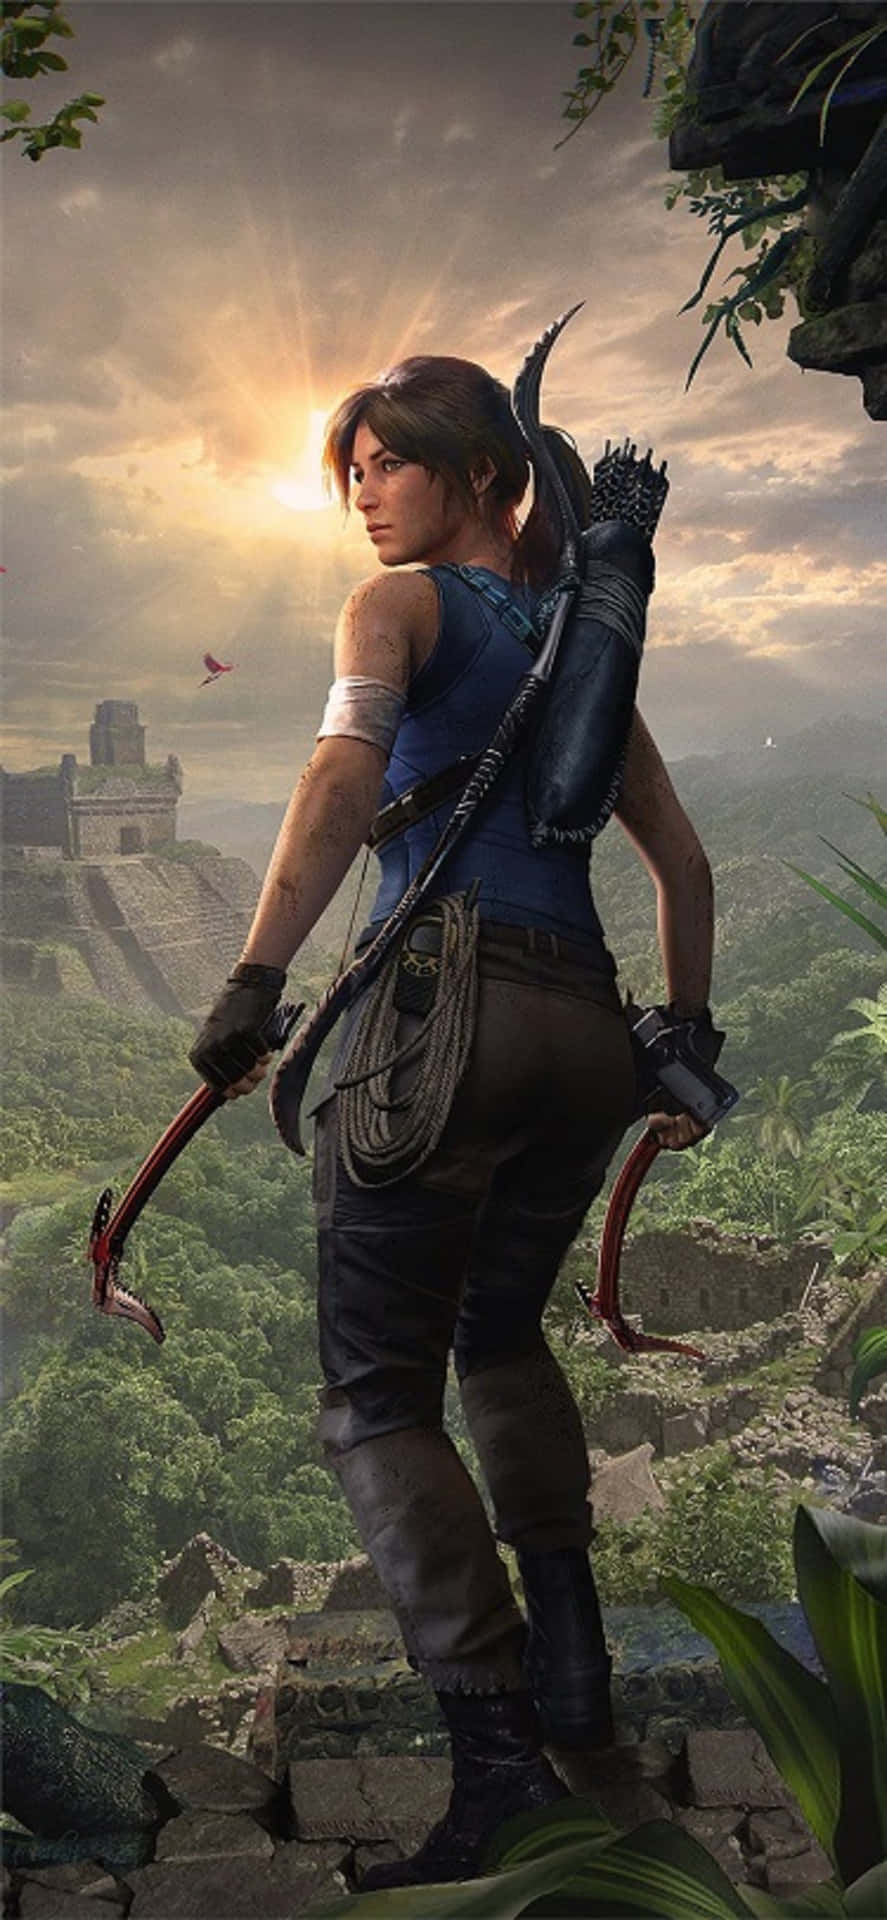 The breathtaking visuals of Shadow of the Tomb Raider on an Iphone X